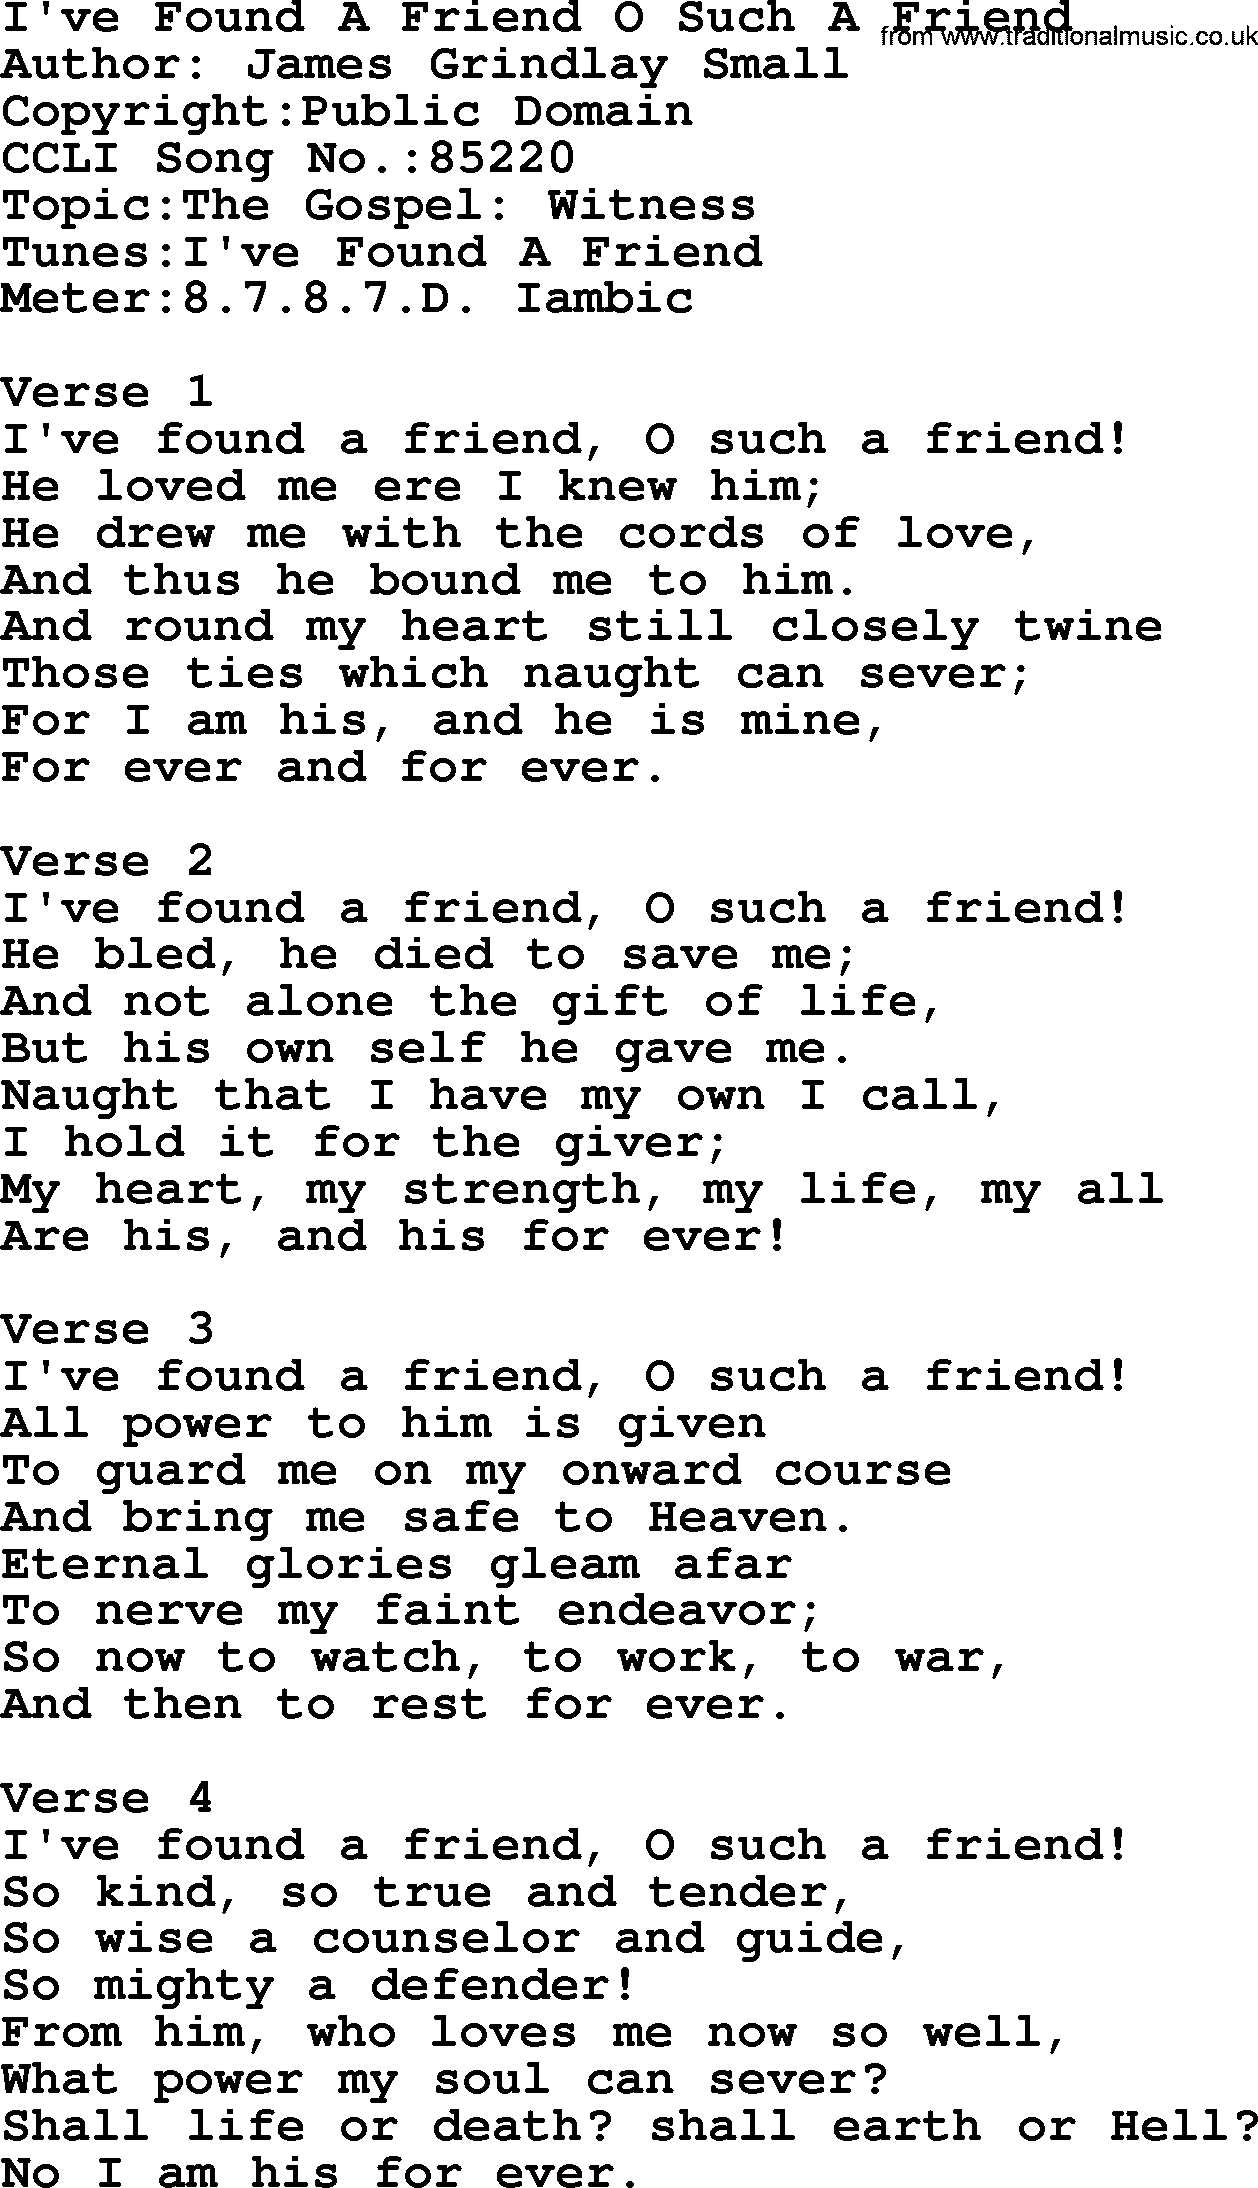 A collection of 500+ most sung Christian church hymns and songs, title: I've Found A Friend O Such A Friend, lyrics, PPTX and PDF